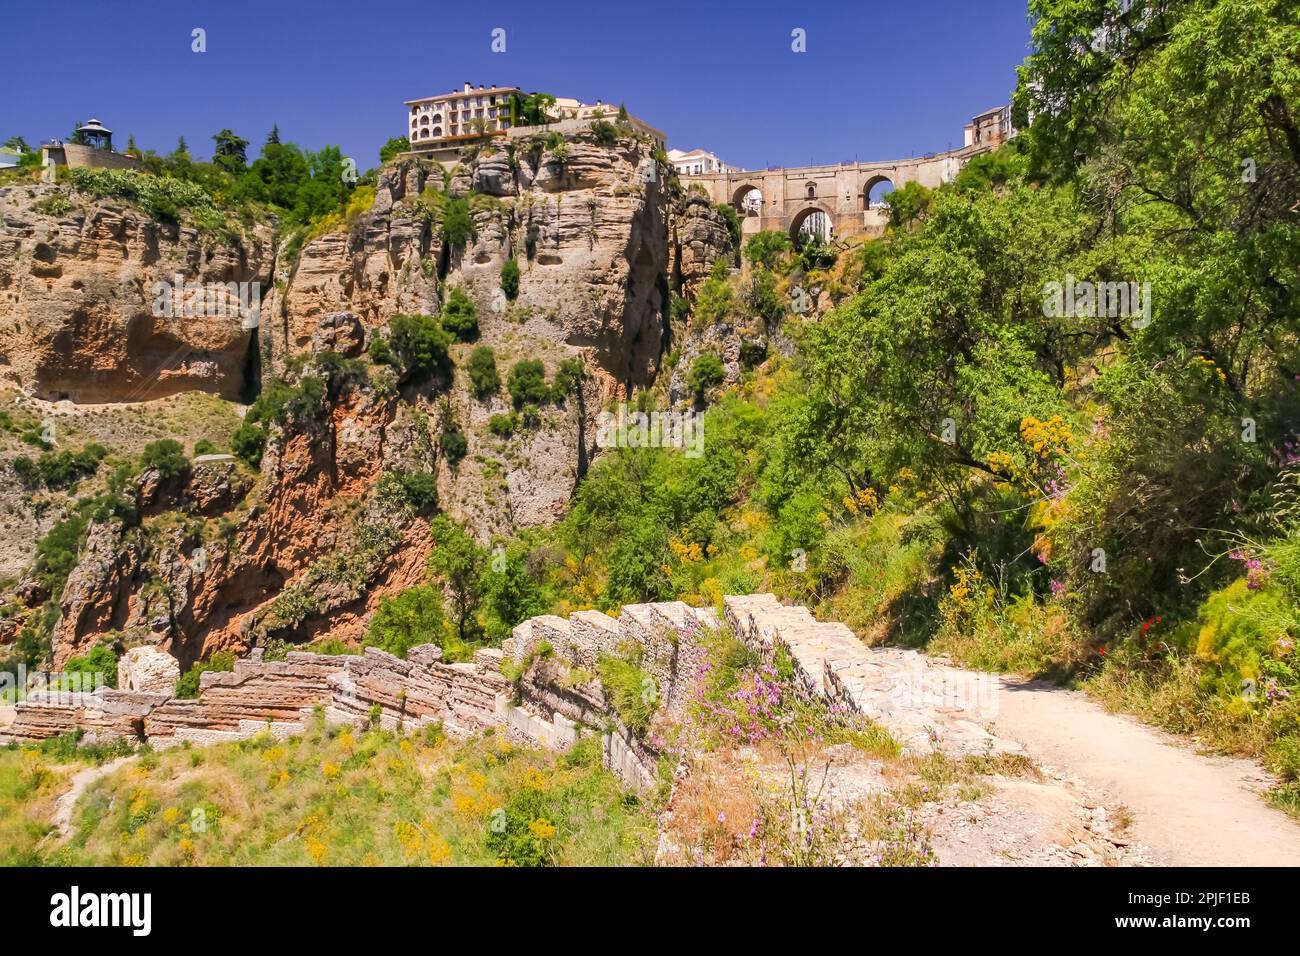 The massive rock wall at the famous bridge Puente Nuevo in the Andalusian city of Ronda in the province of Malaga, Spain Stock Photo